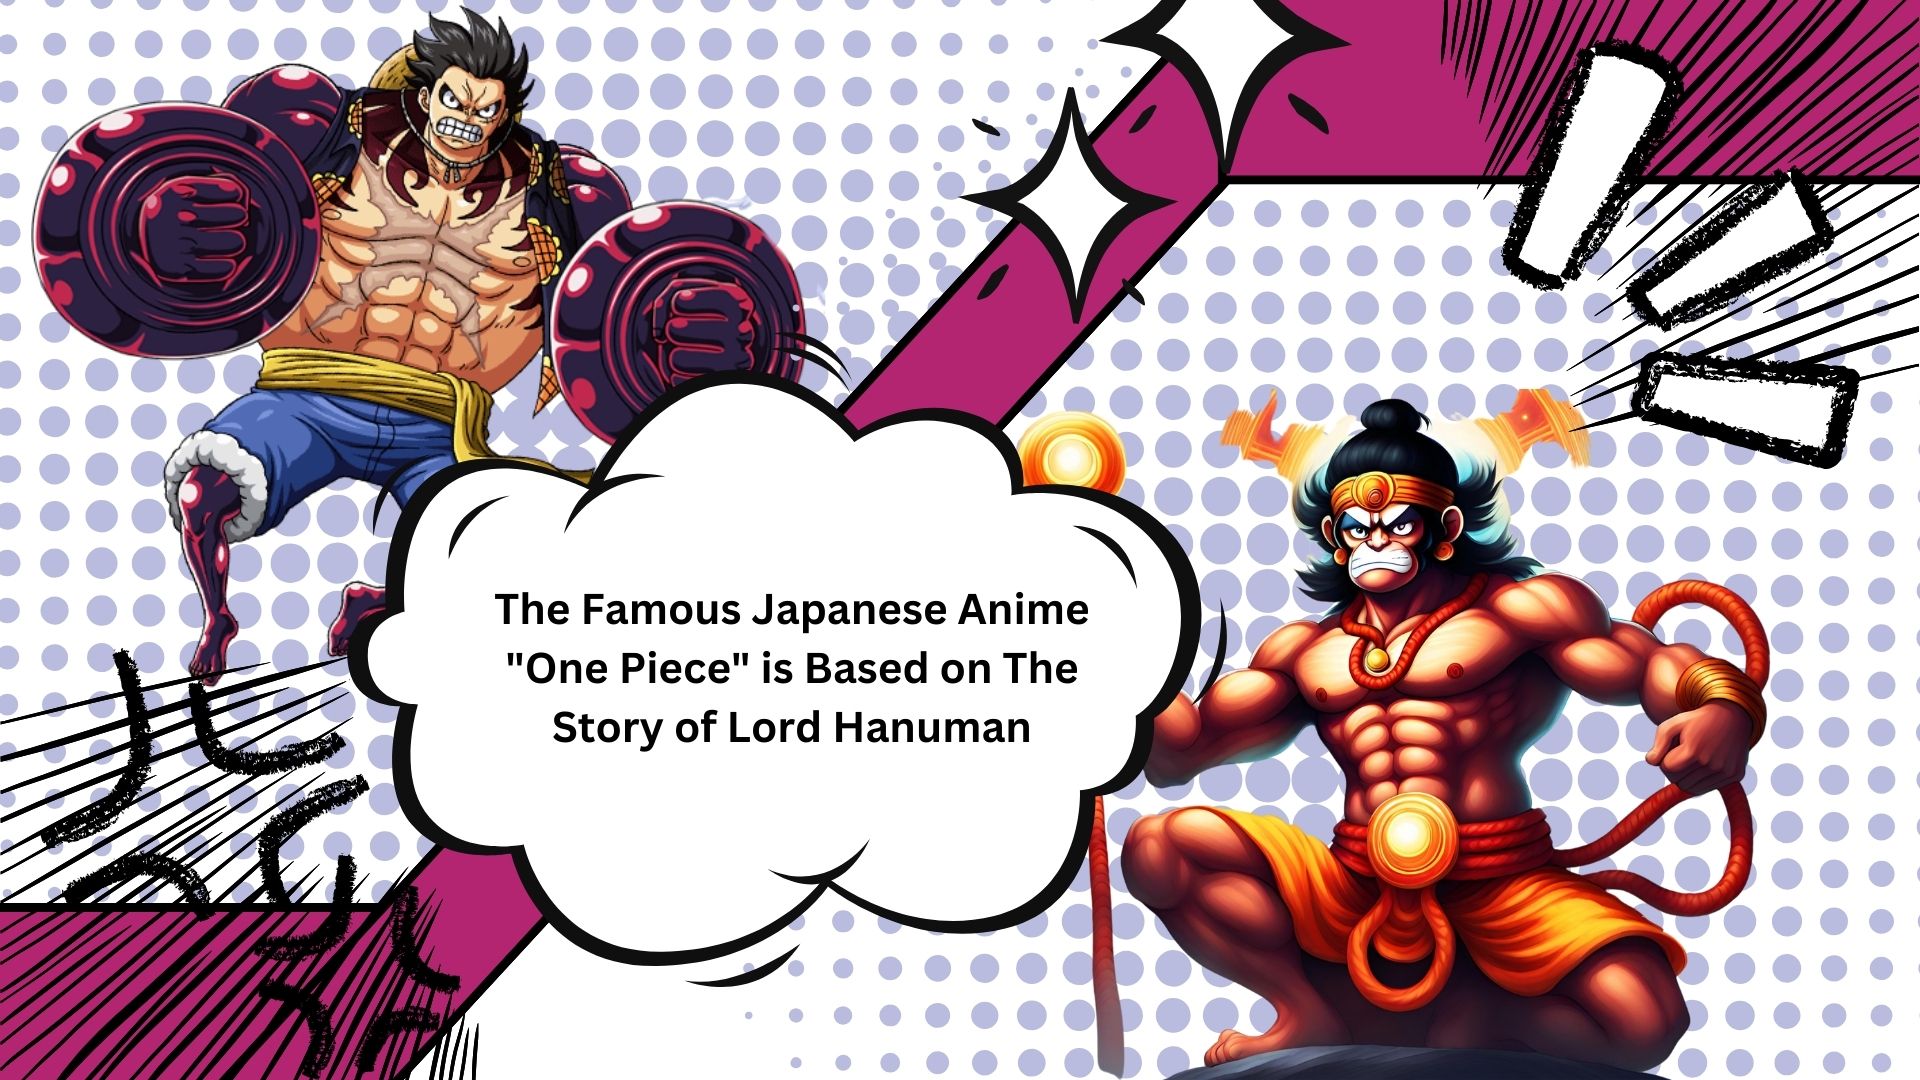 The Famous Japanese Anime "One Piece" is Based on The Story of Lord Hanuman